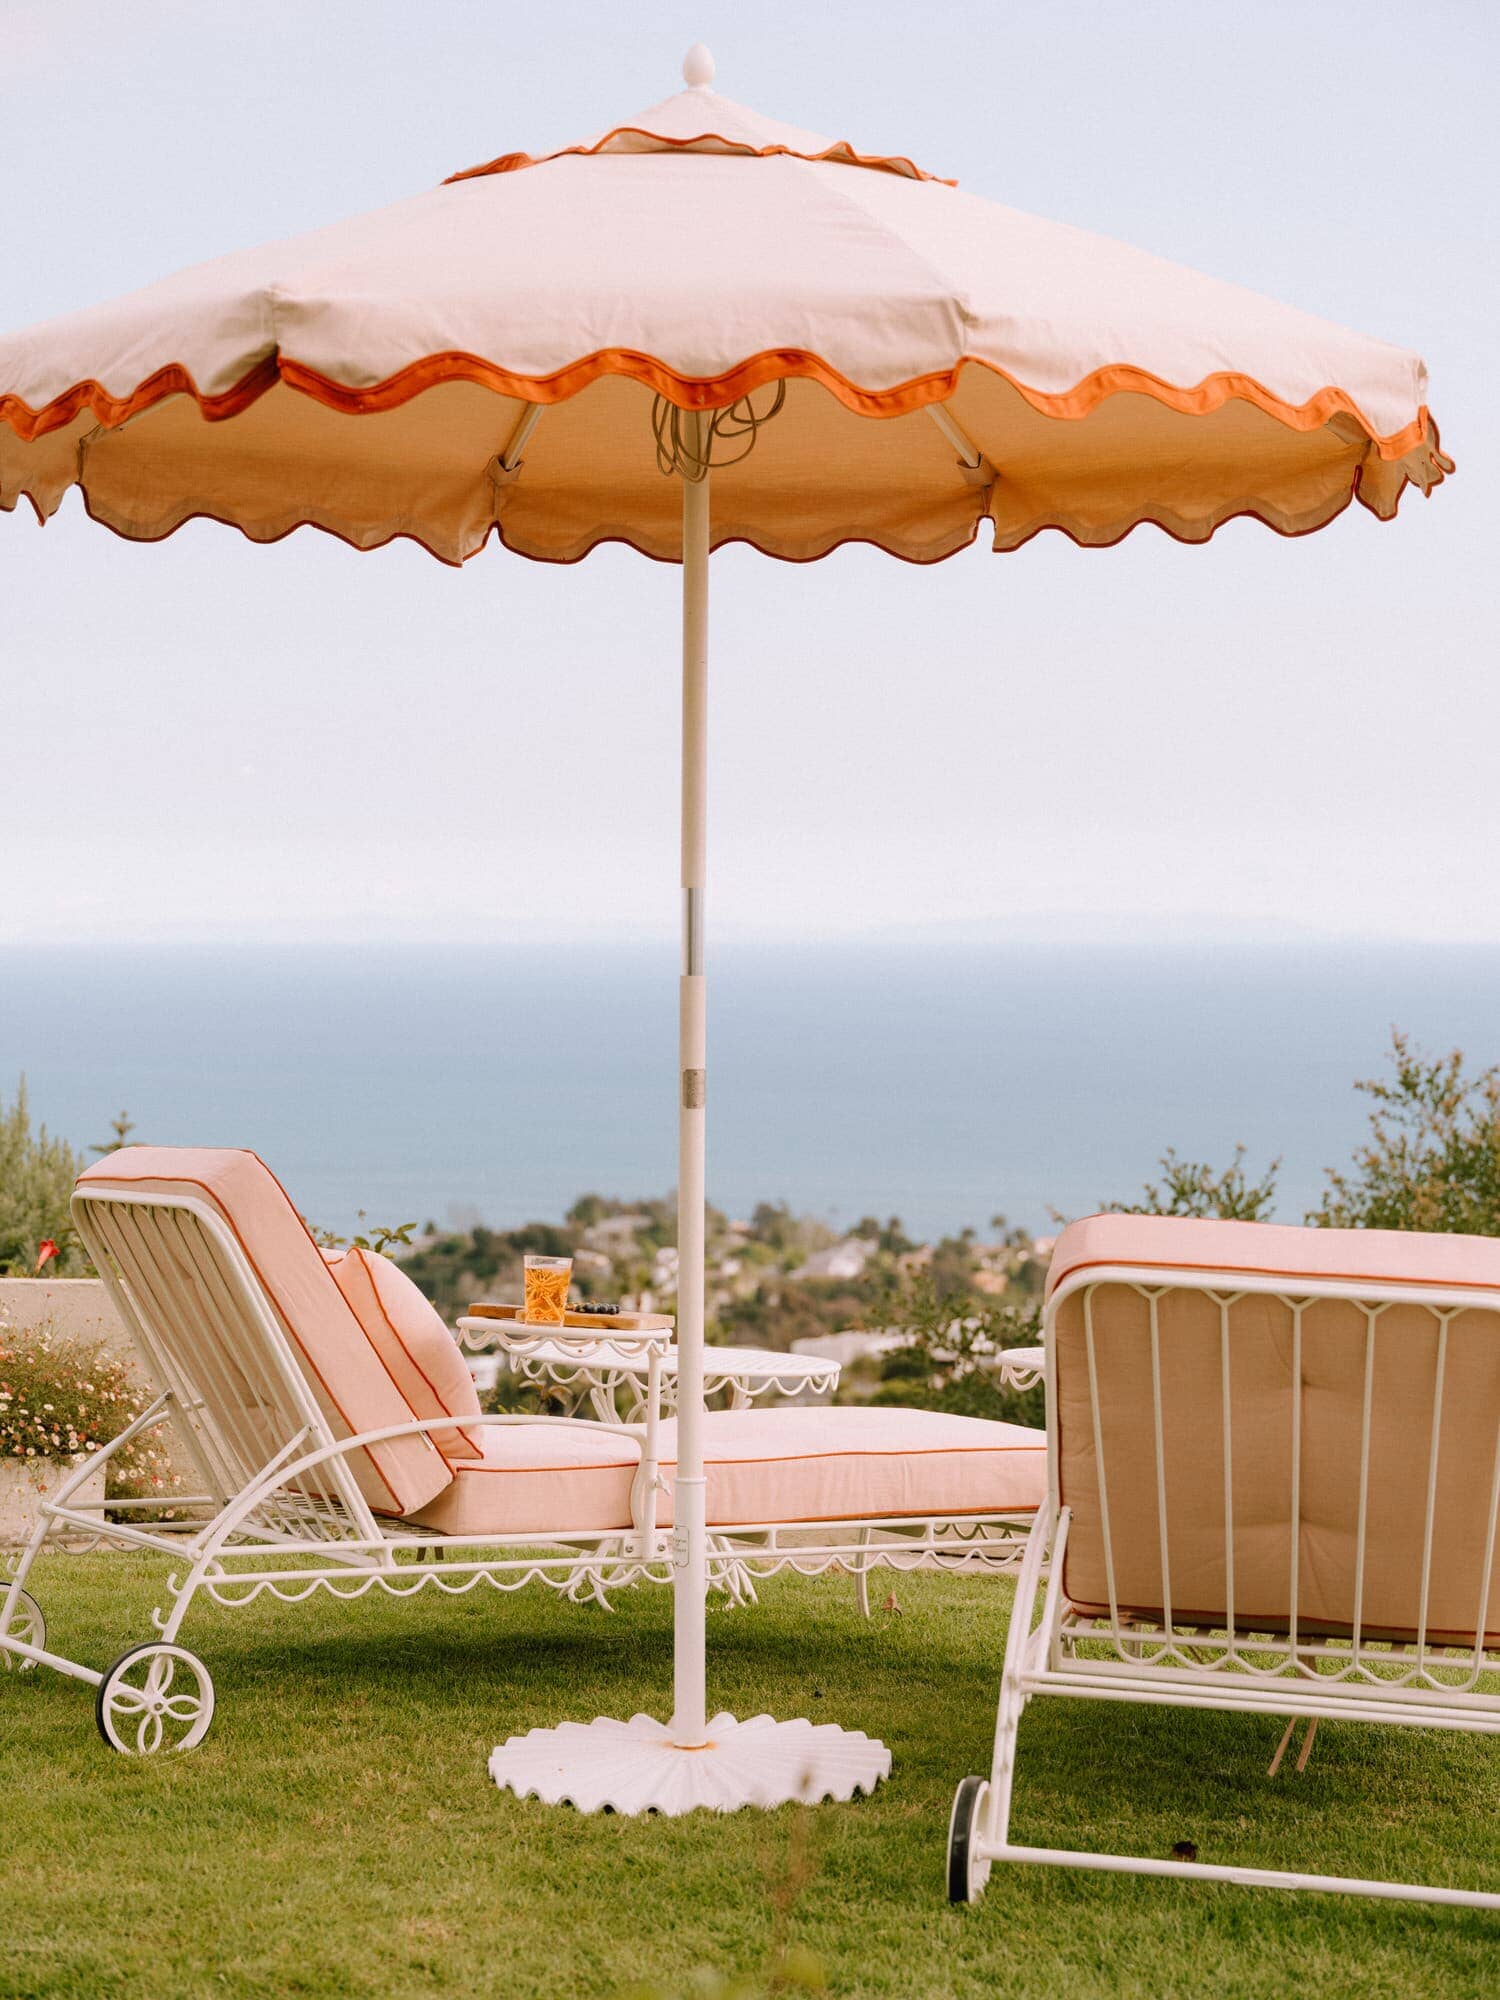 Riviera pink sun loungers and umbrella on the grass